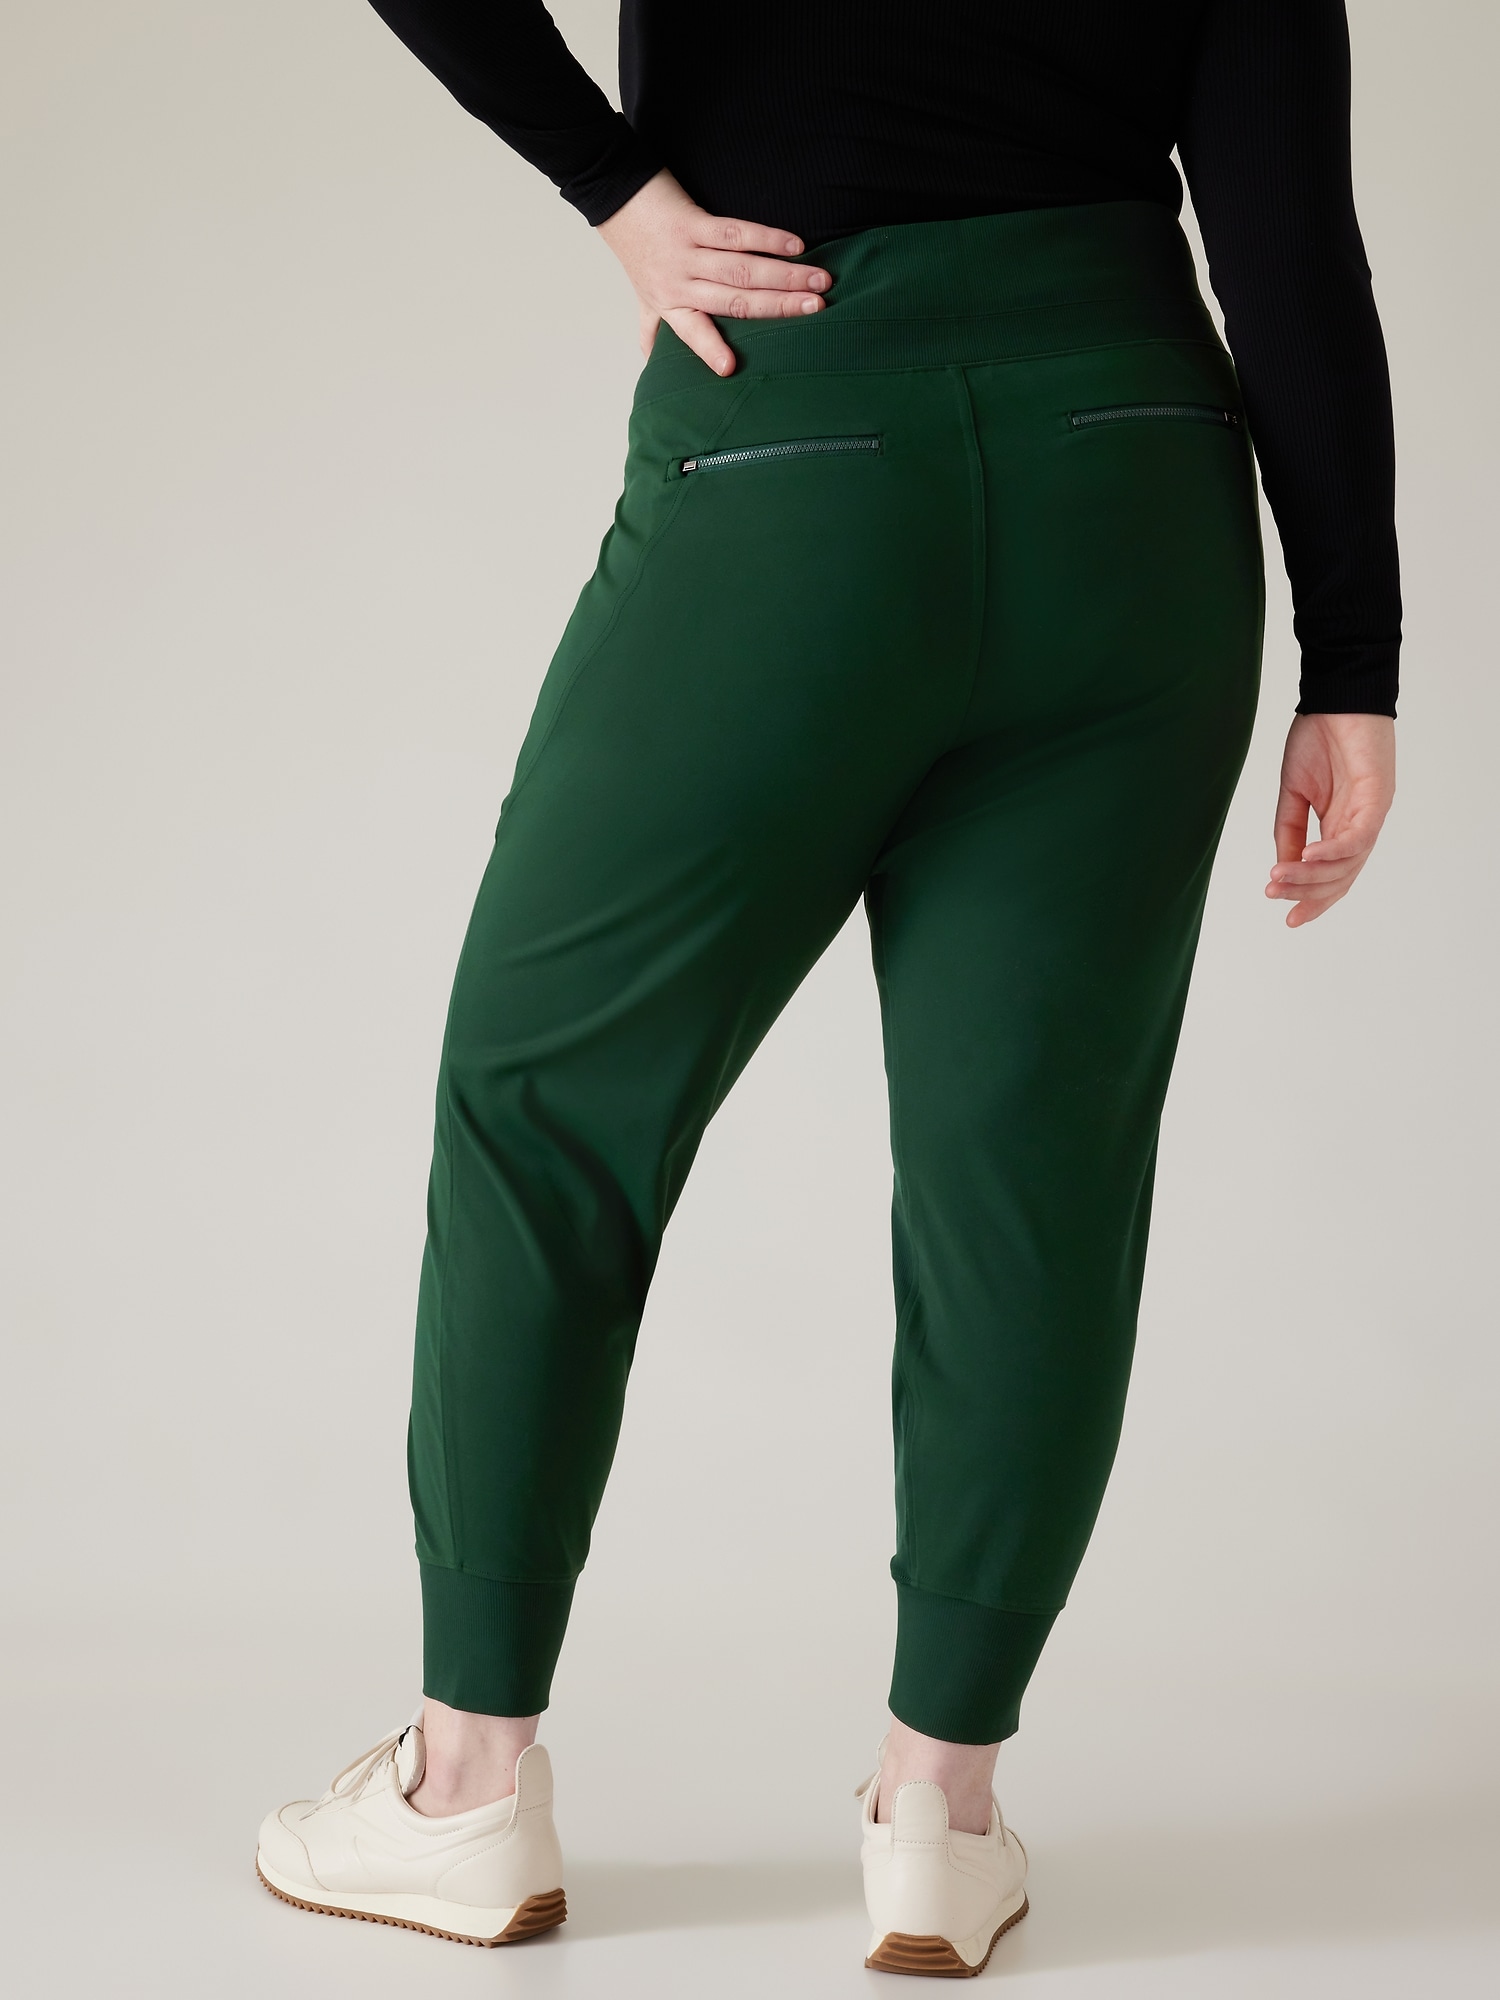 Athleta Salutation Jogger Green Size XS - $30 (66% Off Retail) - From Annie